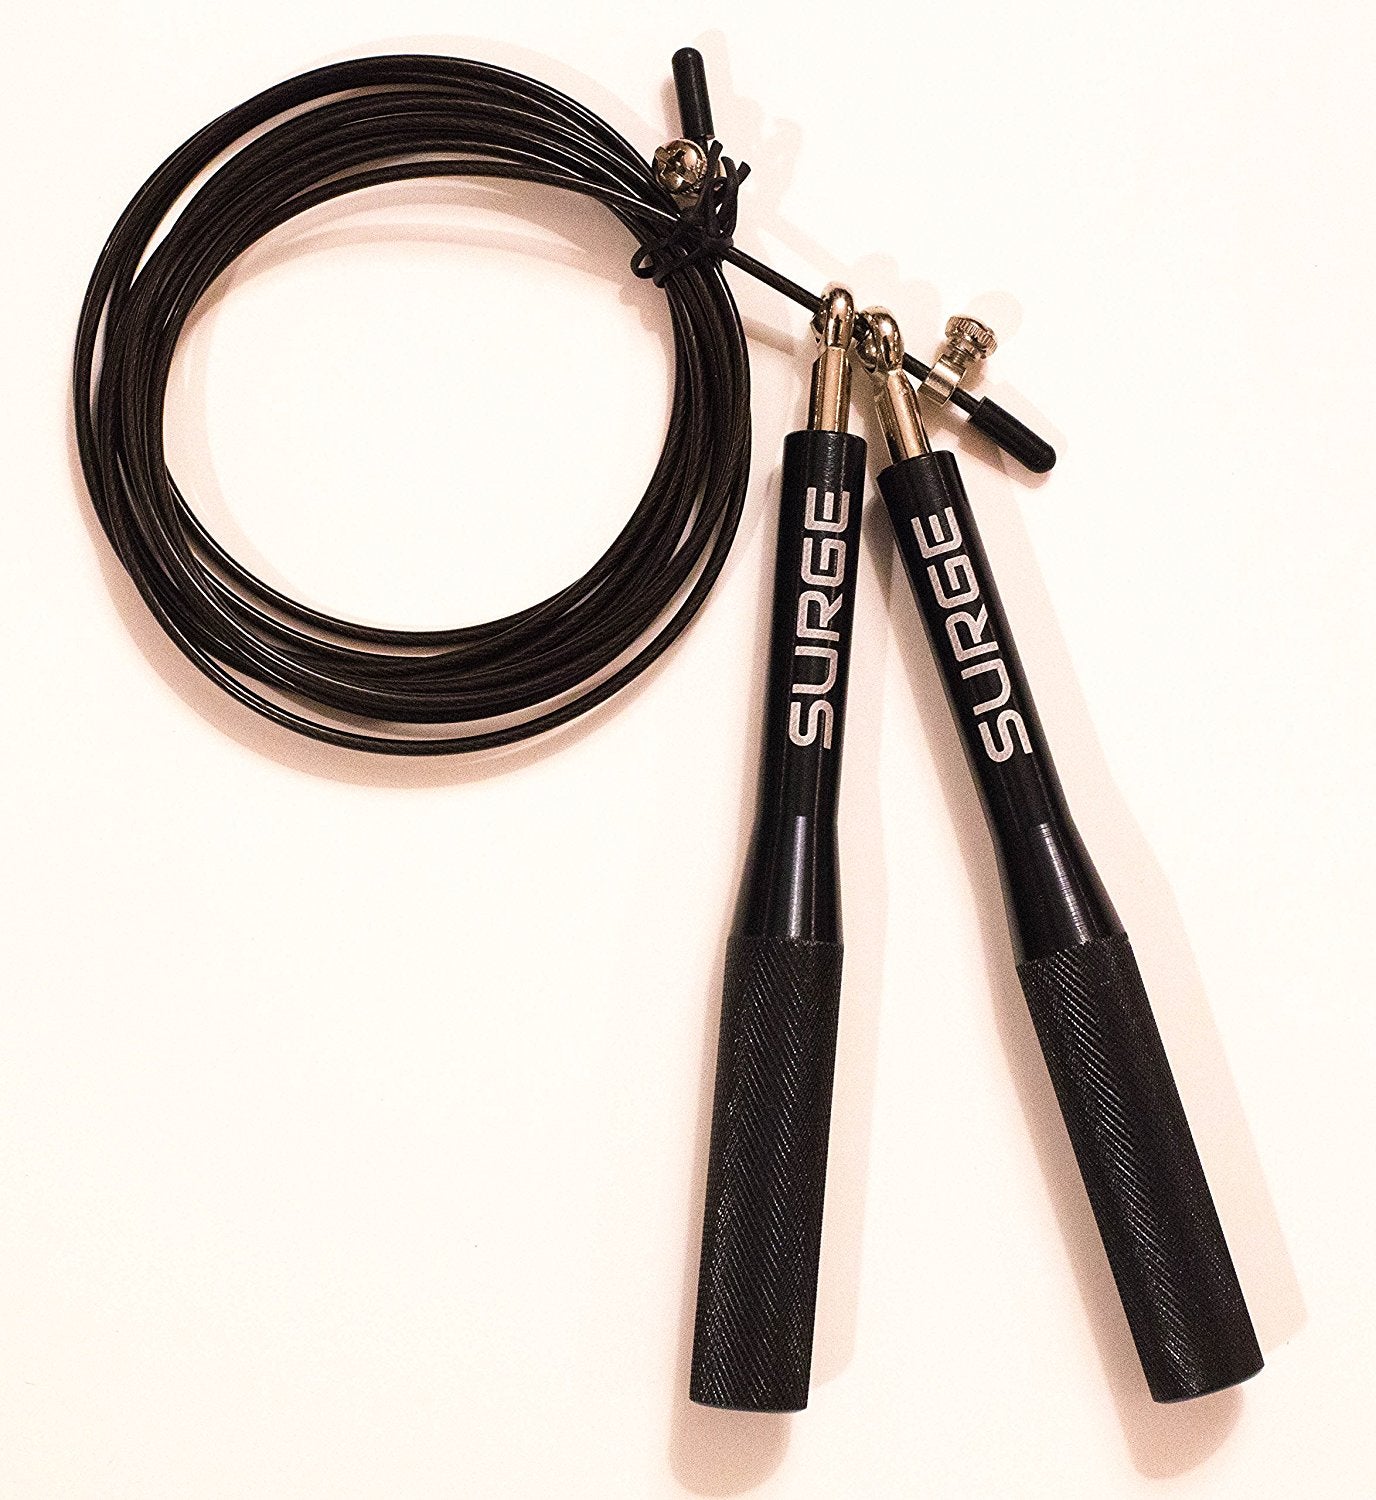 Premium Speed Jump Rope - Highest Quality for Crossfit, Boxing, MMA and Fitness - Everyday Crosstrain